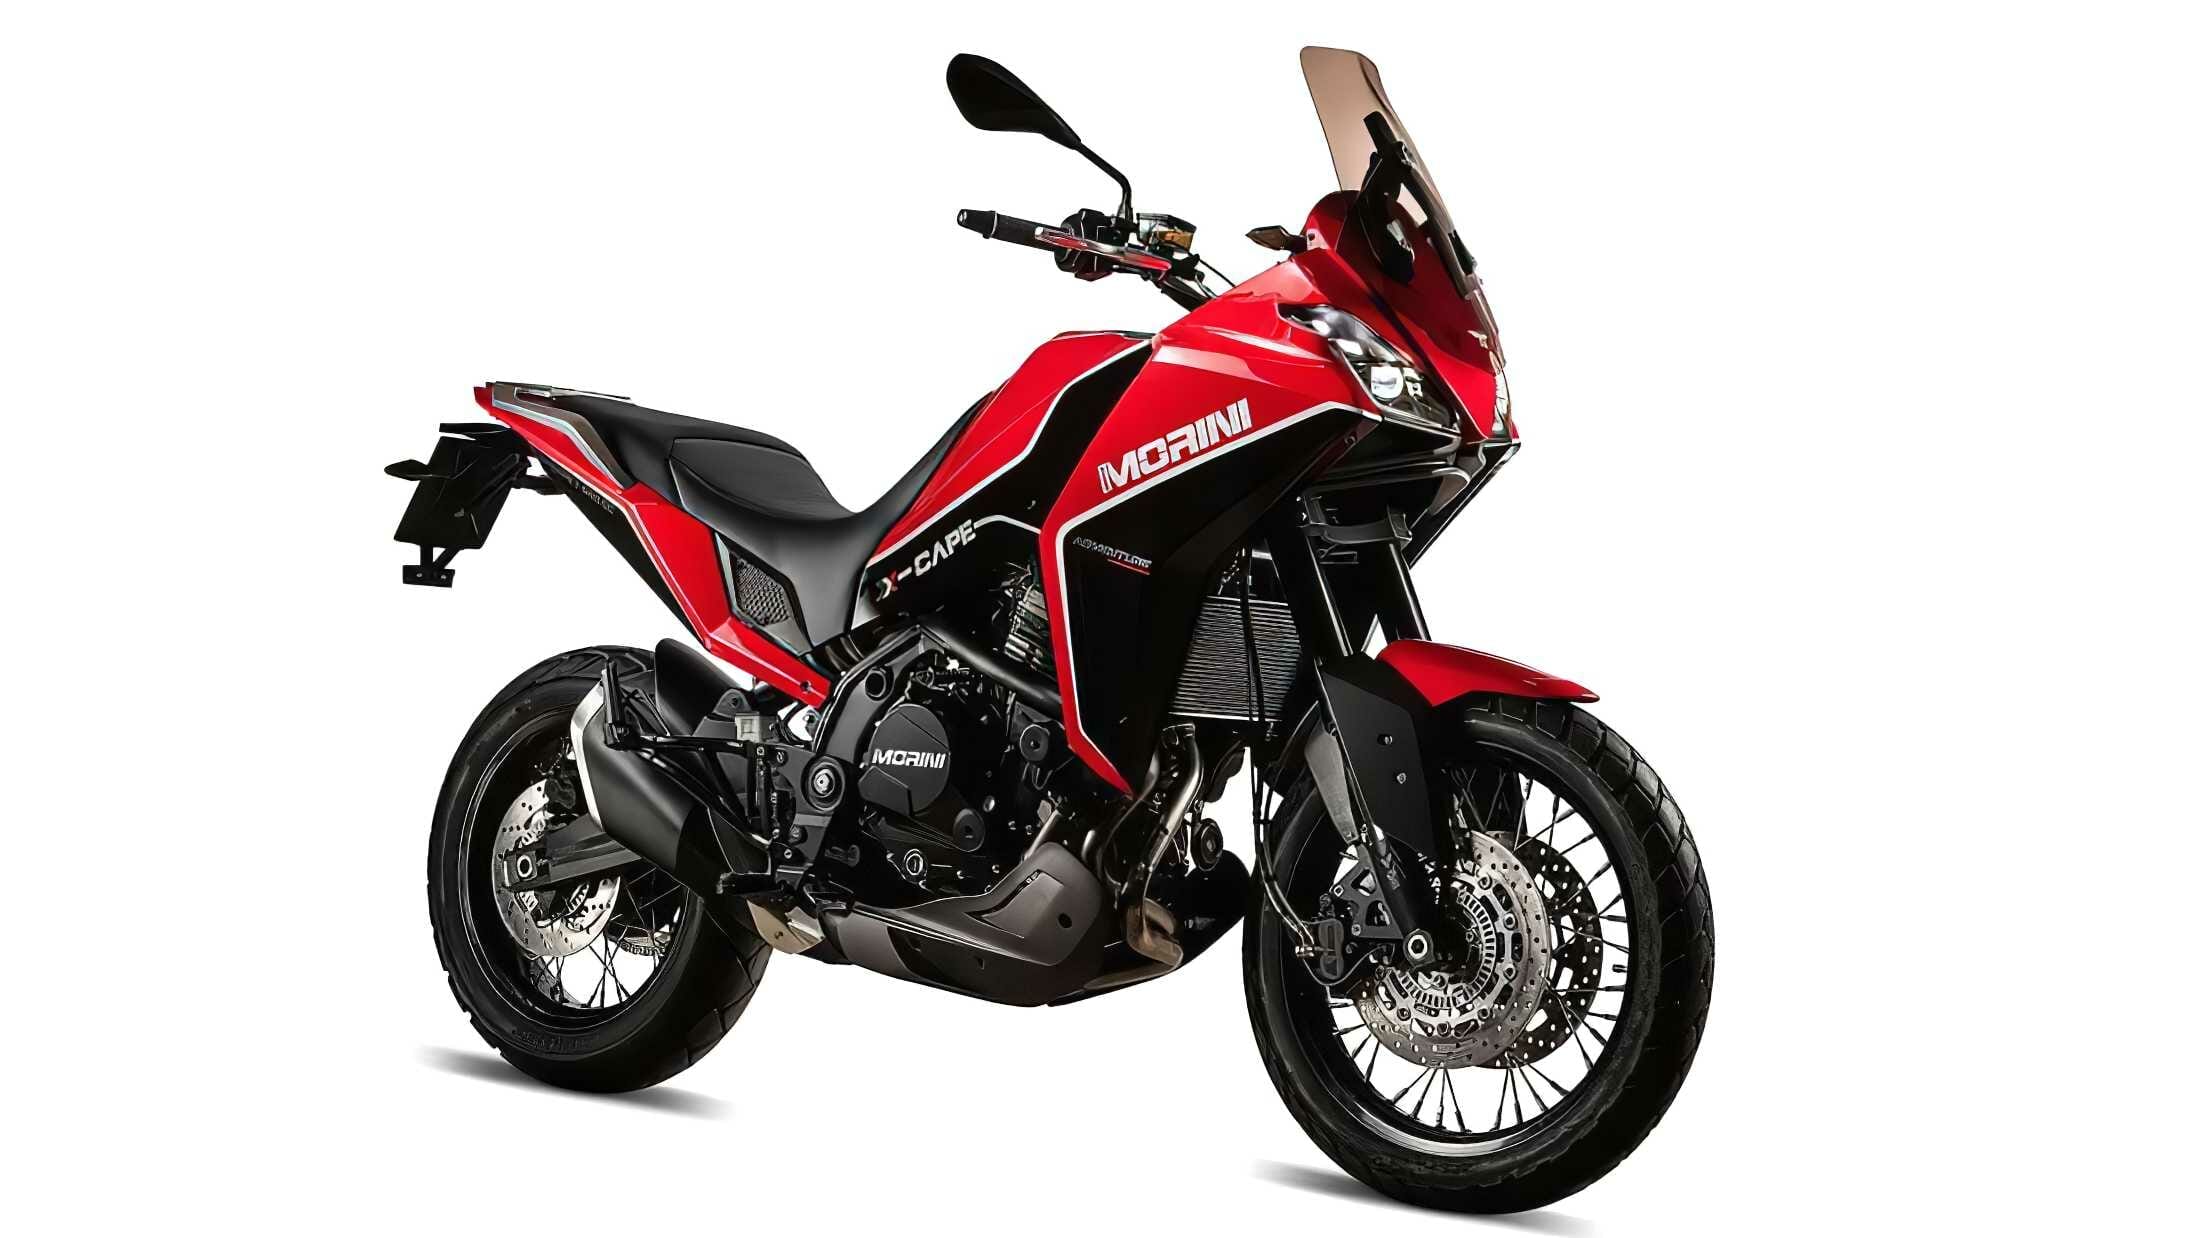 Moto Morini X-Cape 650 comes to Europe
- also in the MOTORCYCLES.NEWS APP